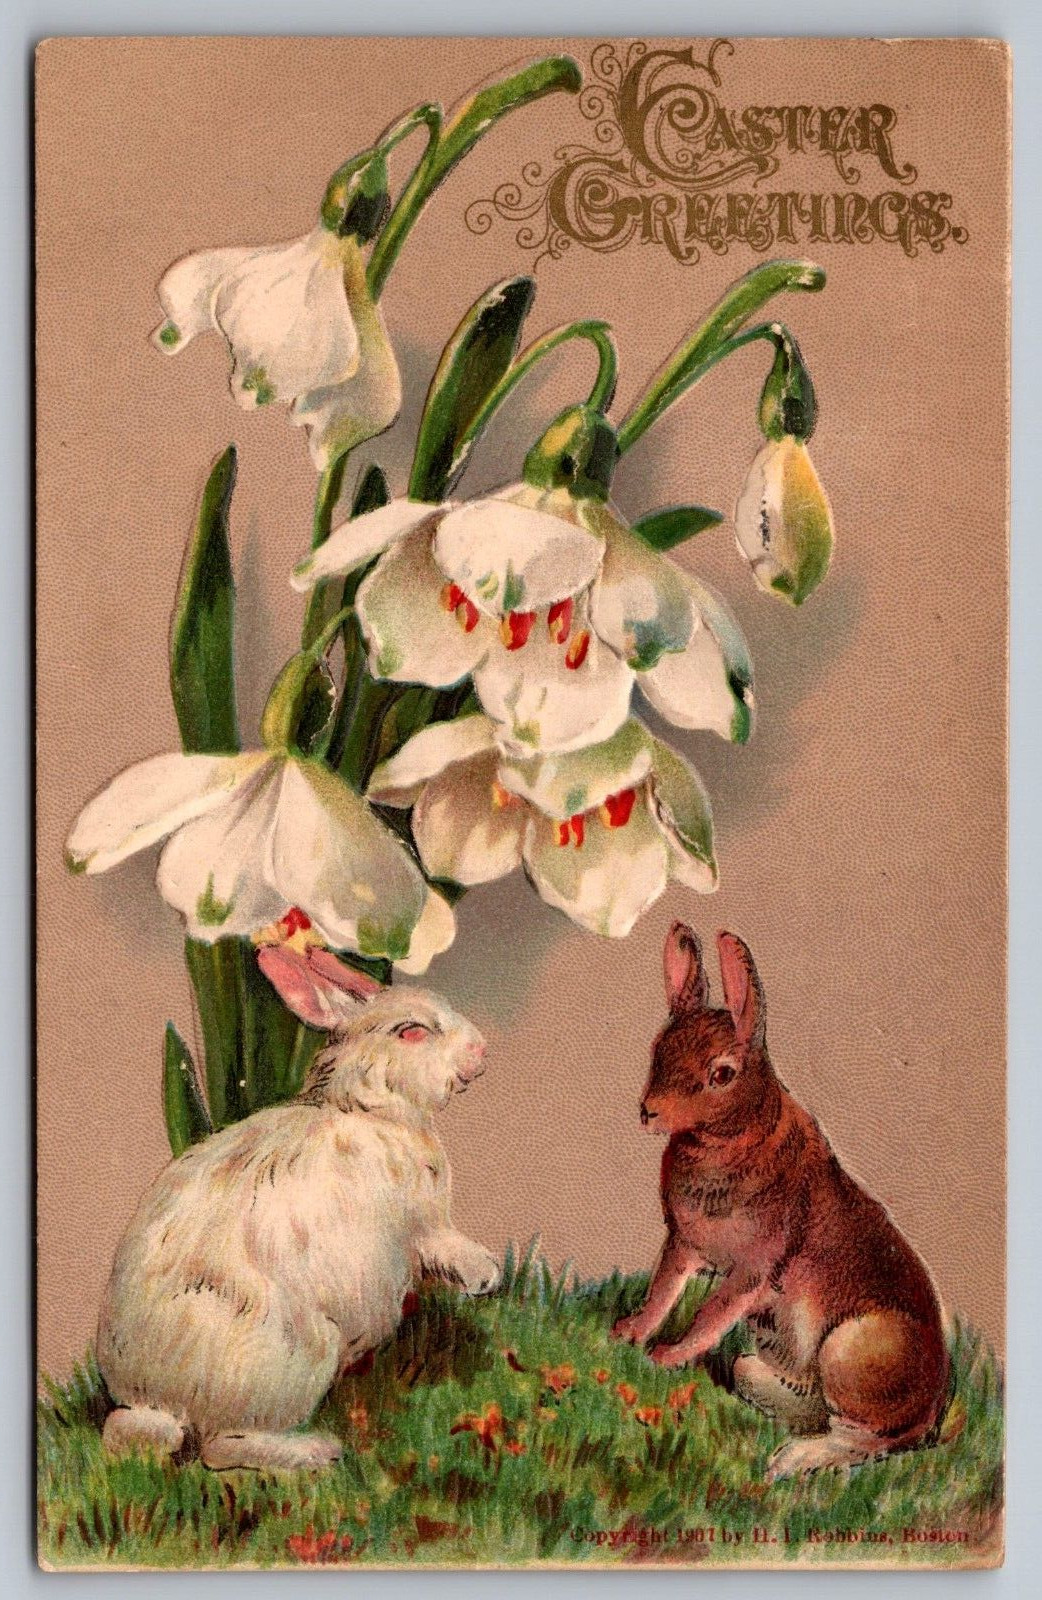 Easter Greetings-Antique Embossed Postcard c1908-Very Hard to Find